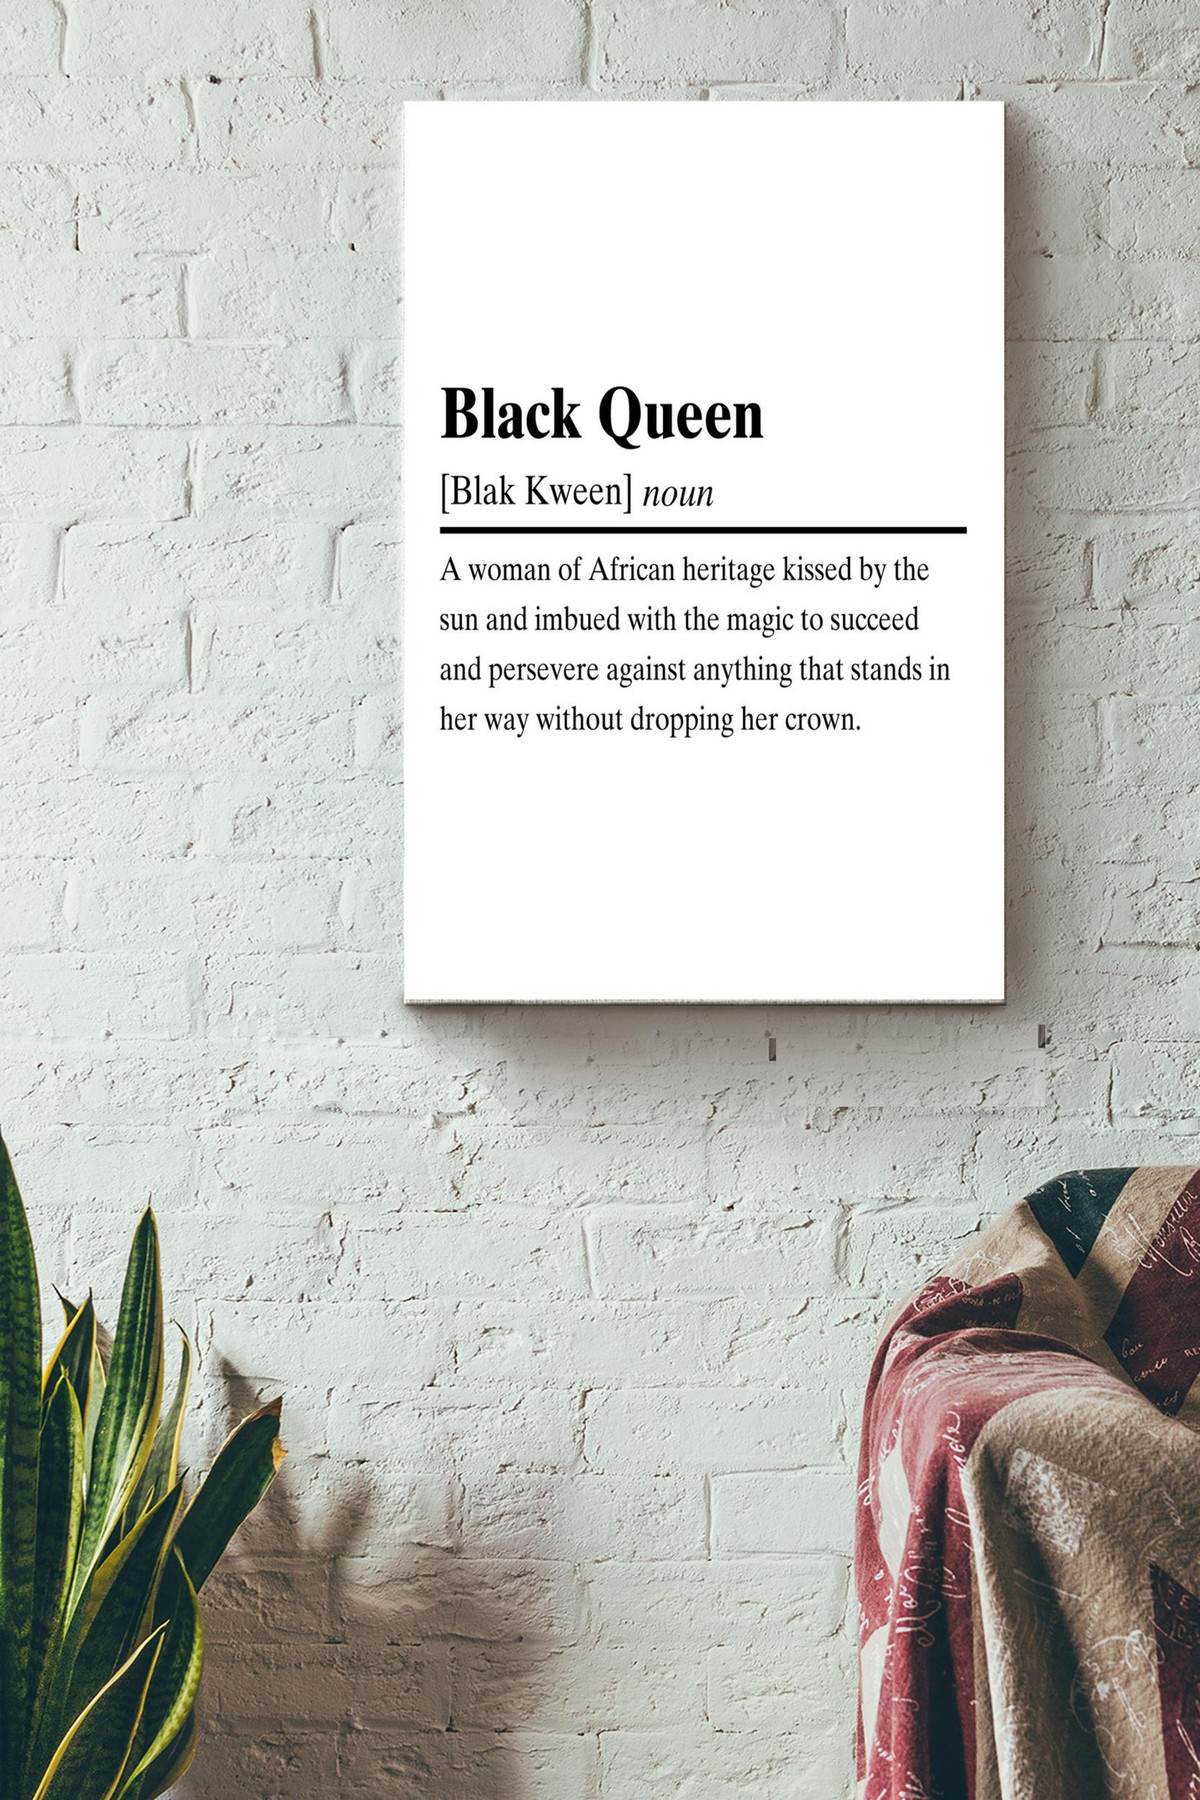 Black Queen Definition Canvas Quote Gift For Black Live Matter Advocate, African Women, Gender Equality Advocate Canvas Gallery Painting Wrapped Canvas Framed Prints, Canvas Paintings Wrapped Canvas 8x10